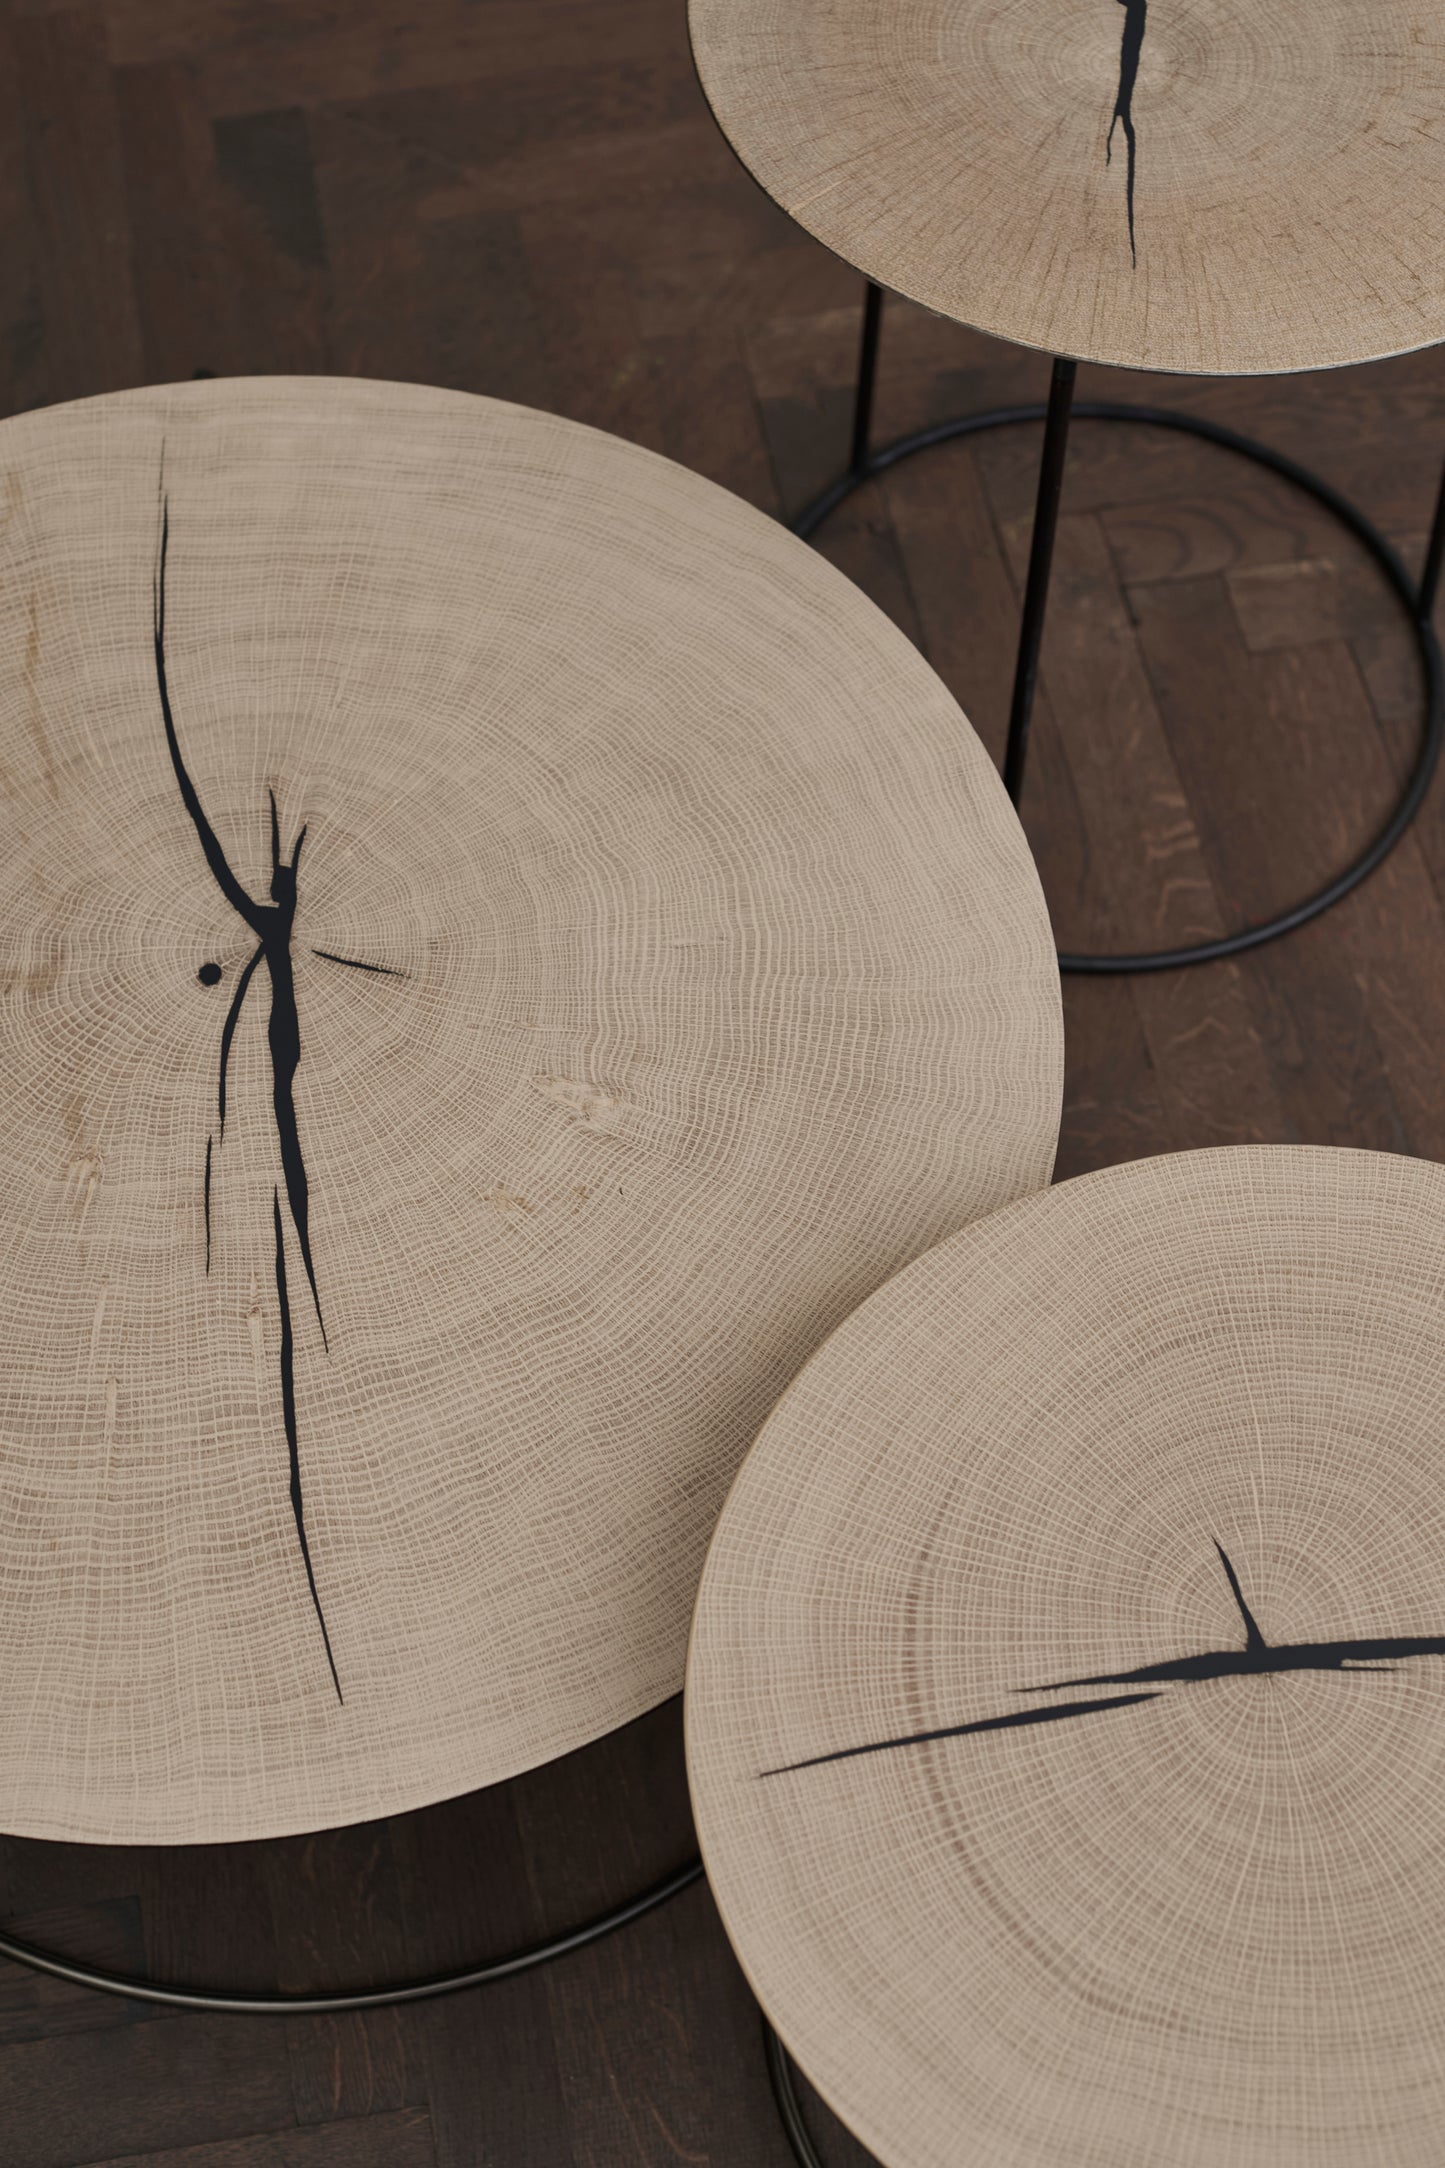 Three different sizes of the Nimbus Coffee Table - clearly showing the beautiful details in the oak wood tabletops.